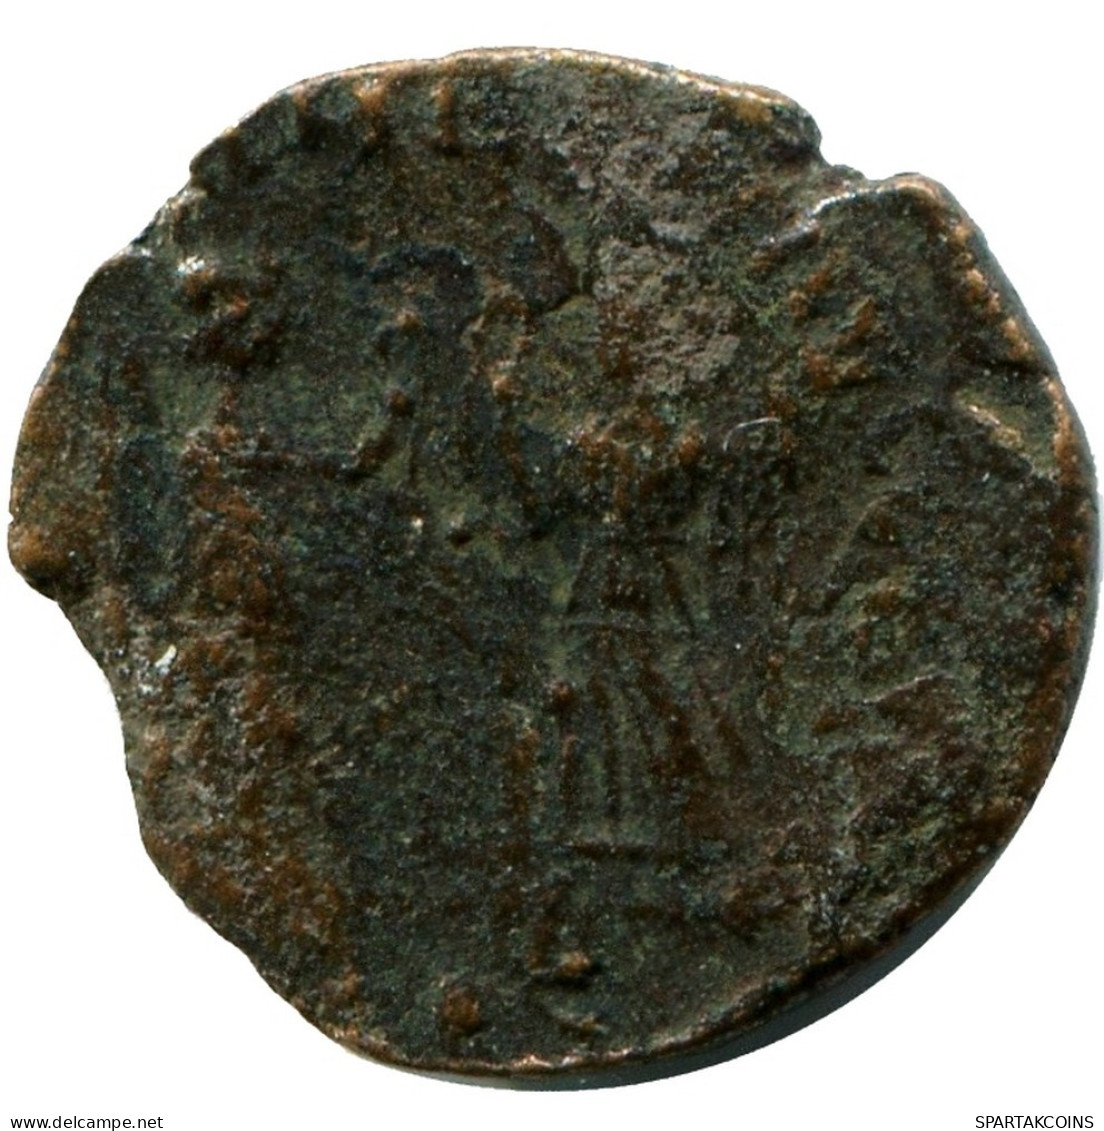 CONSTANS MINTED IN ROME ITALY FROM THE ROYAL ONTARIO MUSEUM #ANC11498.14.E.A - The Christian Empire (307 AD Tot 363 AD)